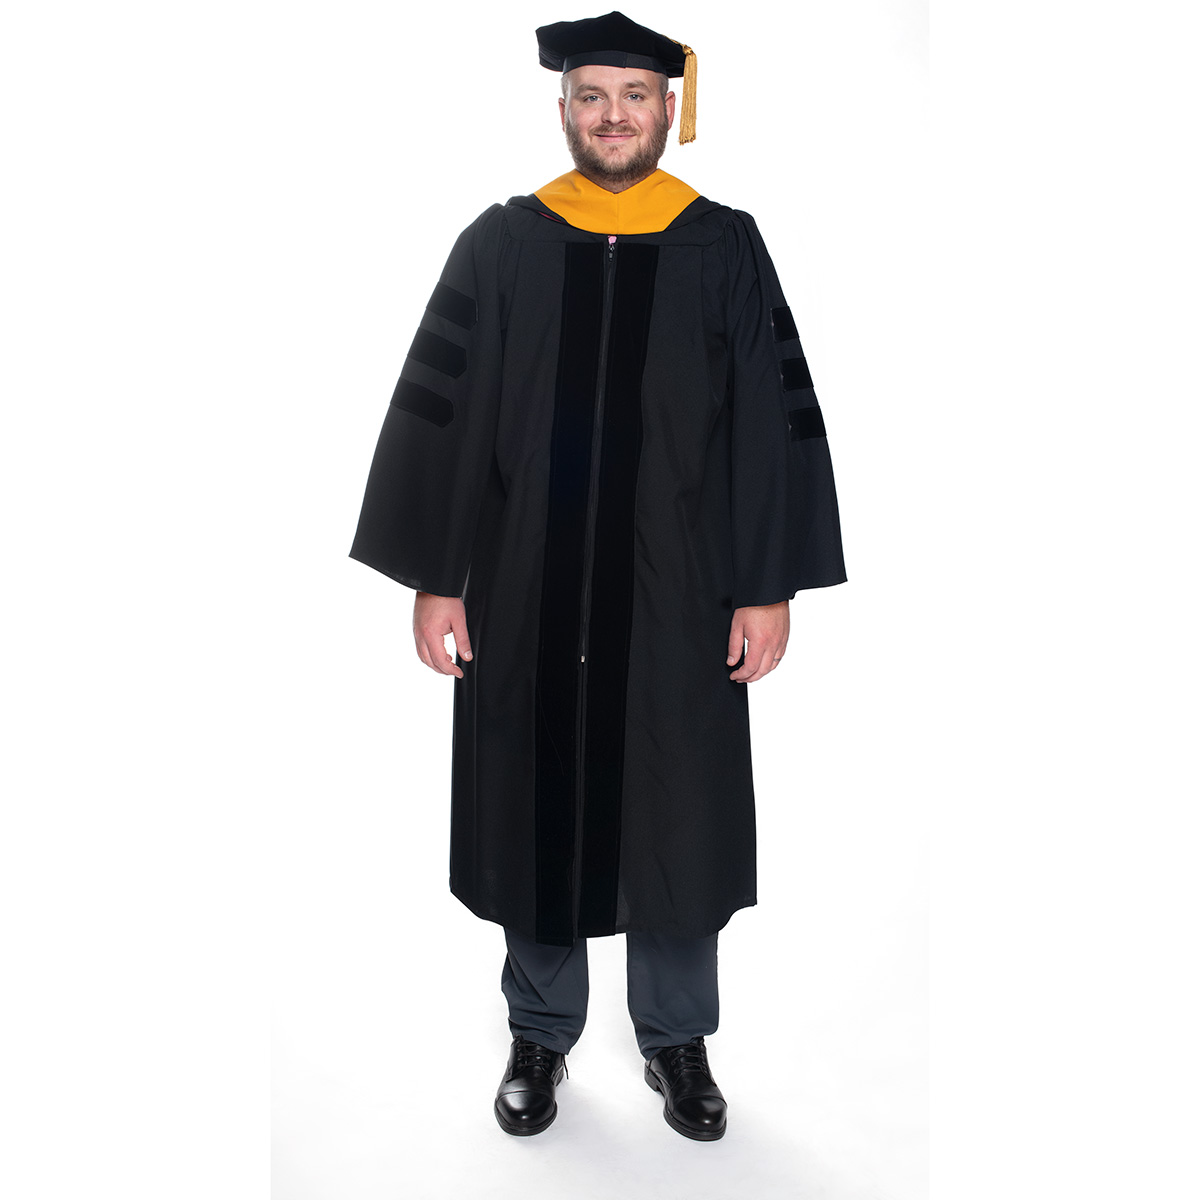 Cap & Grad Tassel (gown not included) –